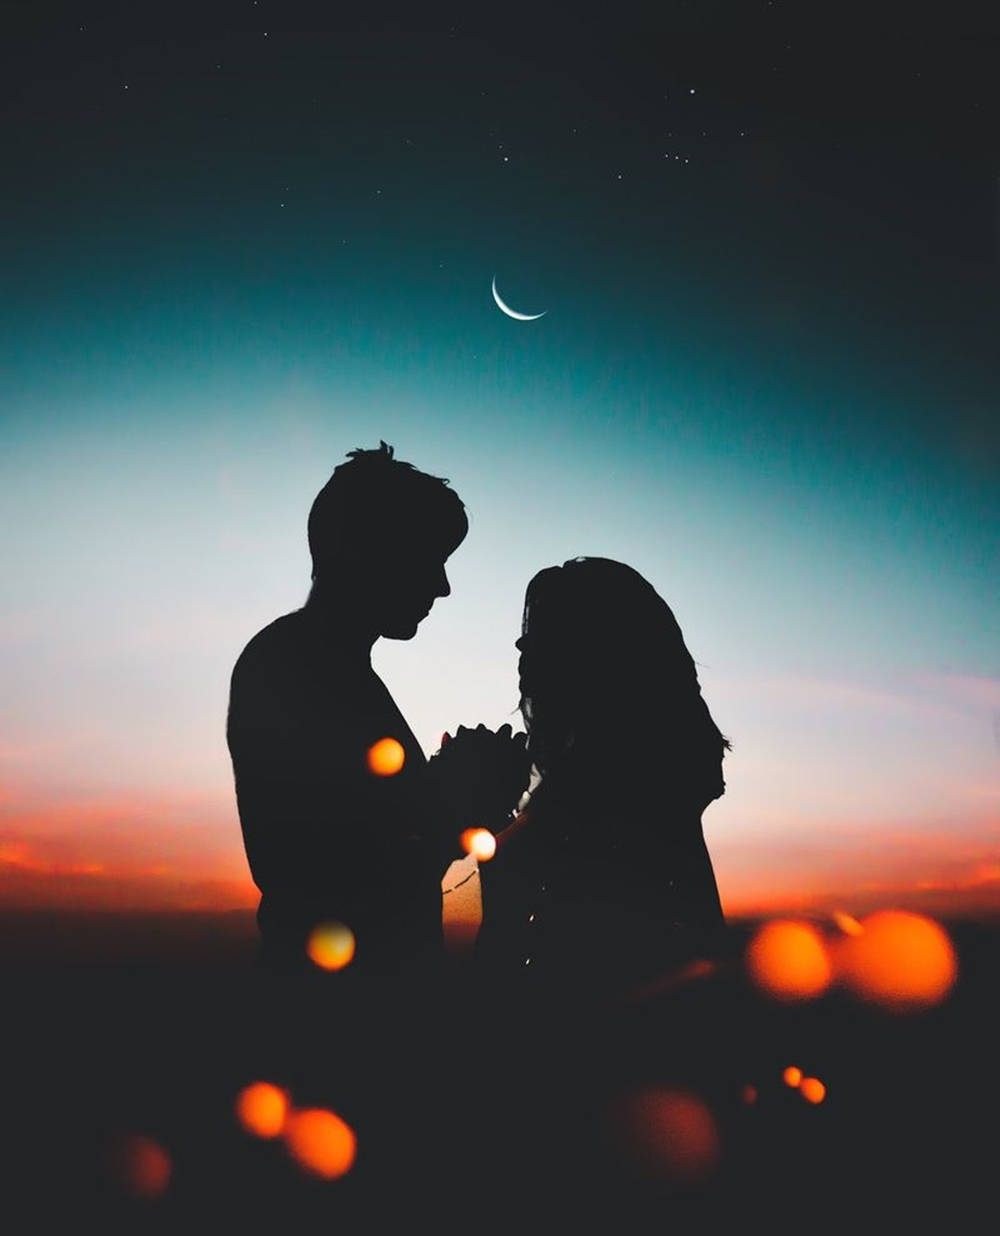 Aesthetic Couple With Crescent Moon Background